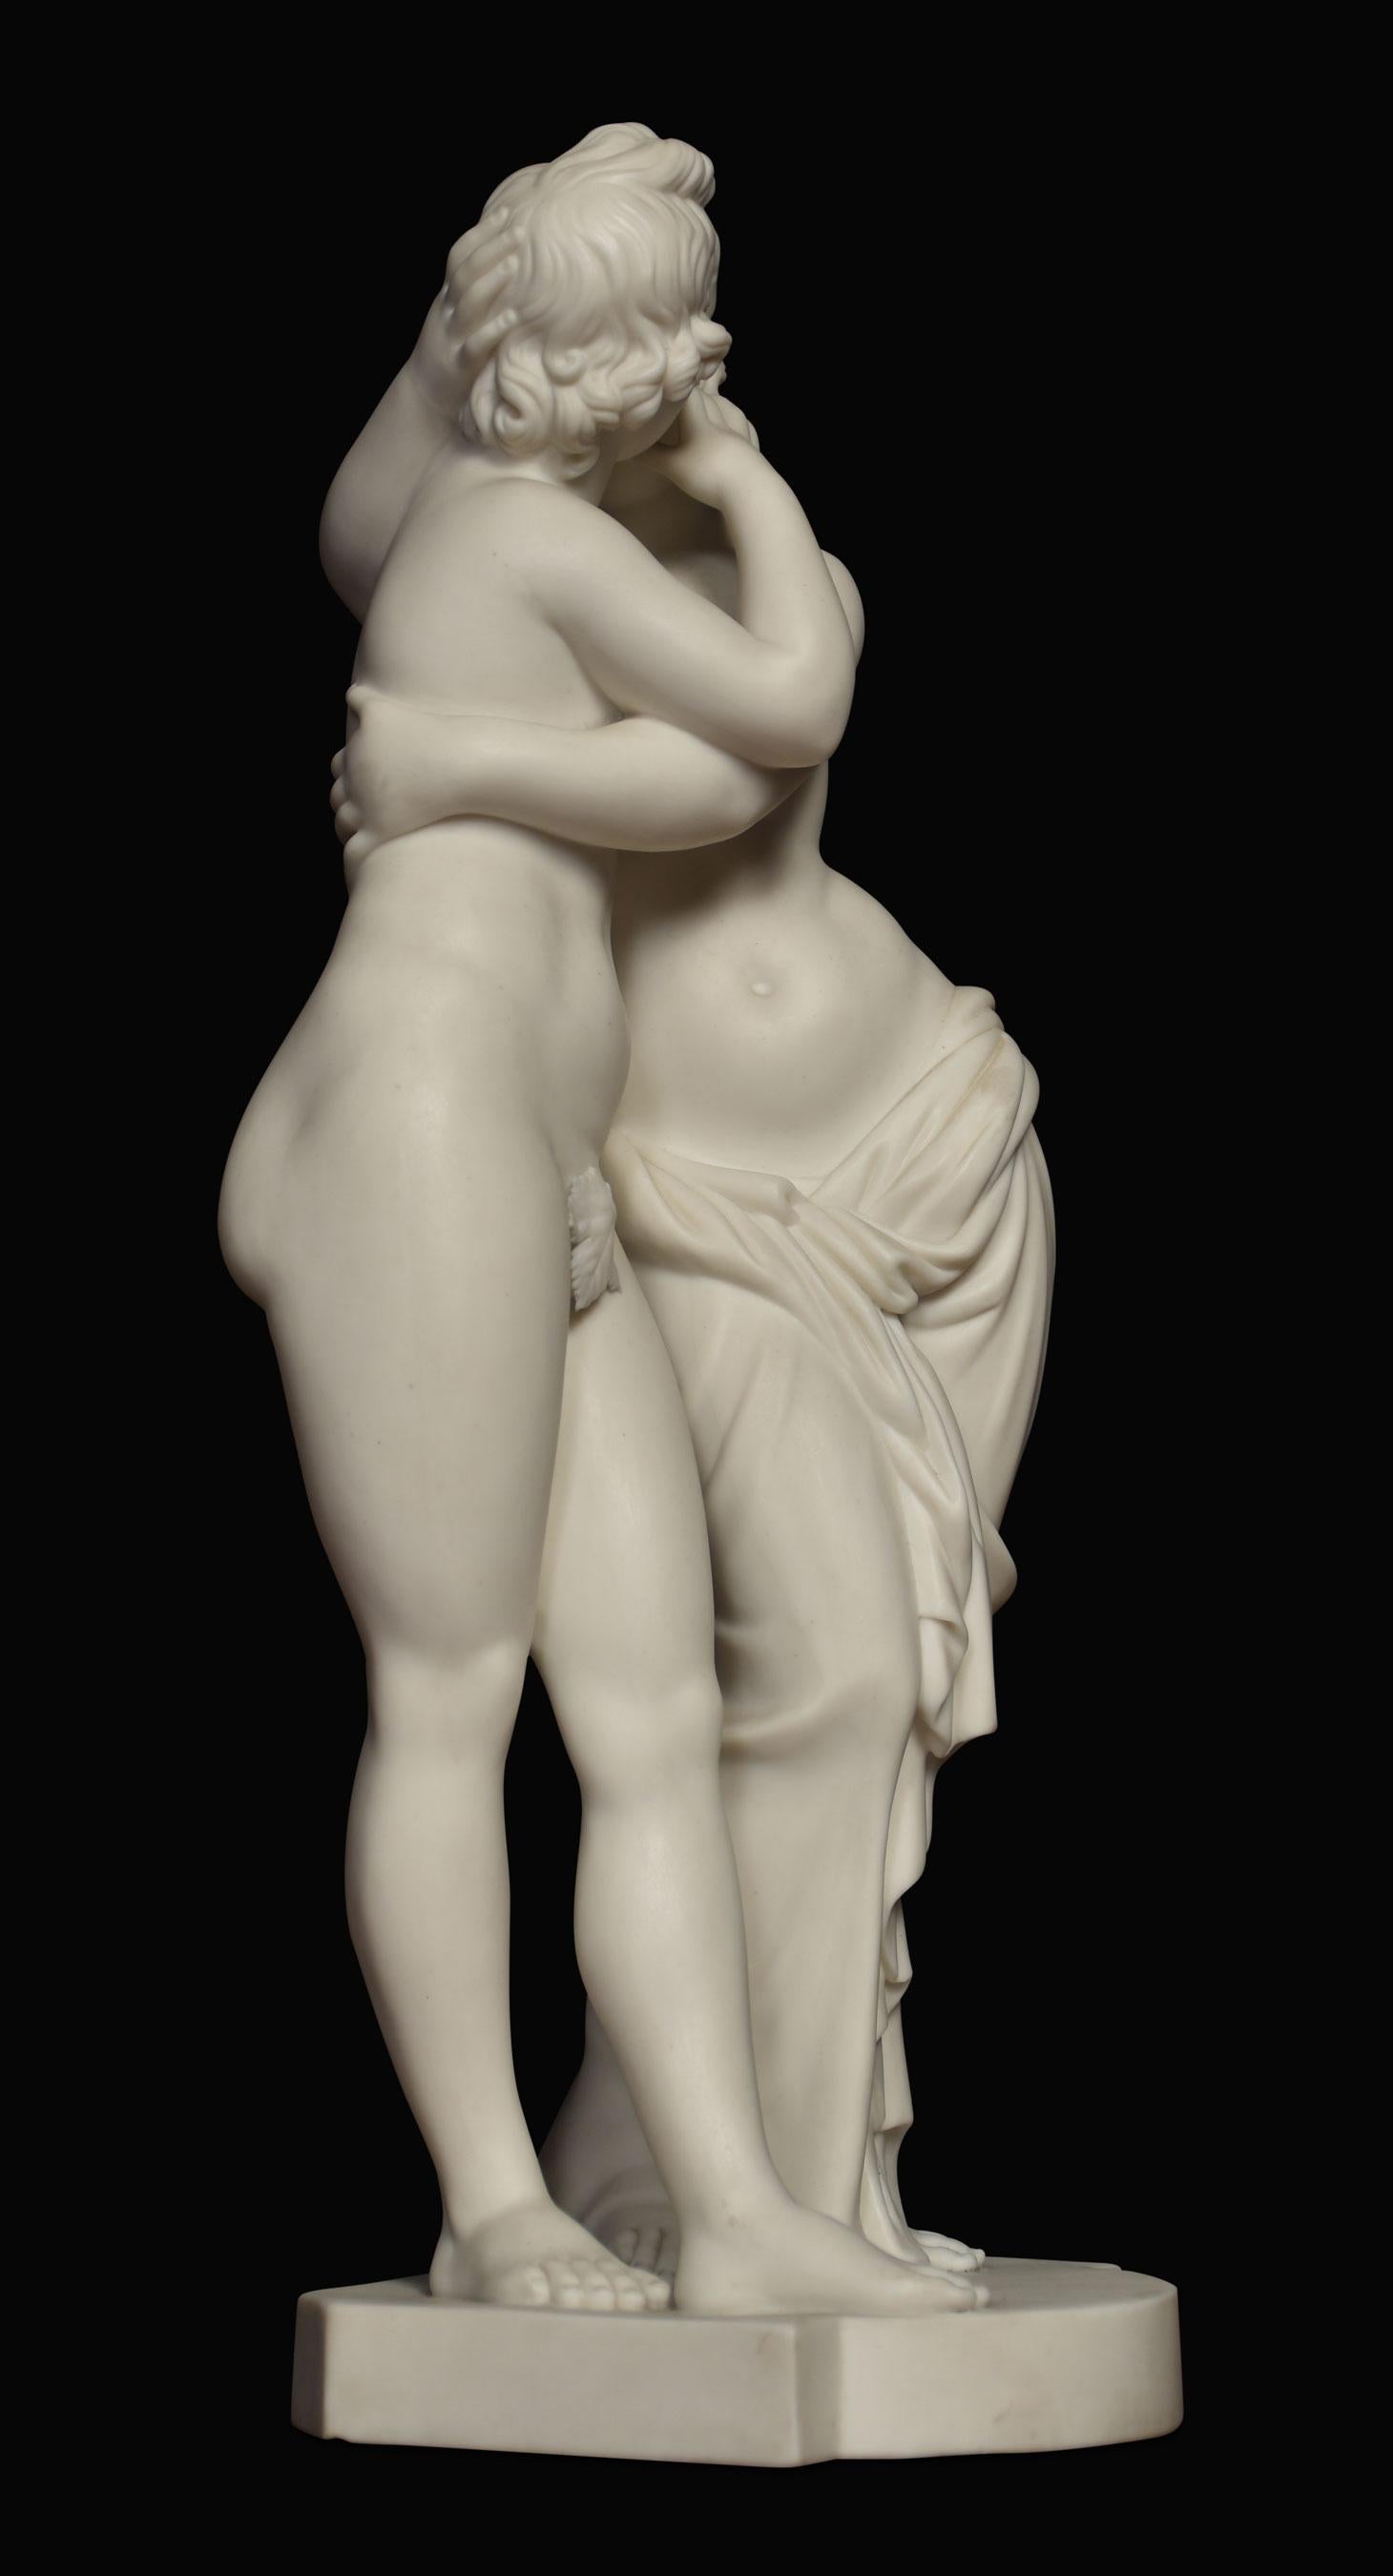 19th century Parianware figure depicting Cupid and Psyche Raised up on shaped marble base signed H. Bourne.
Dimensions
Height 17 inches
Width 7 inches
Depth 7 inches.